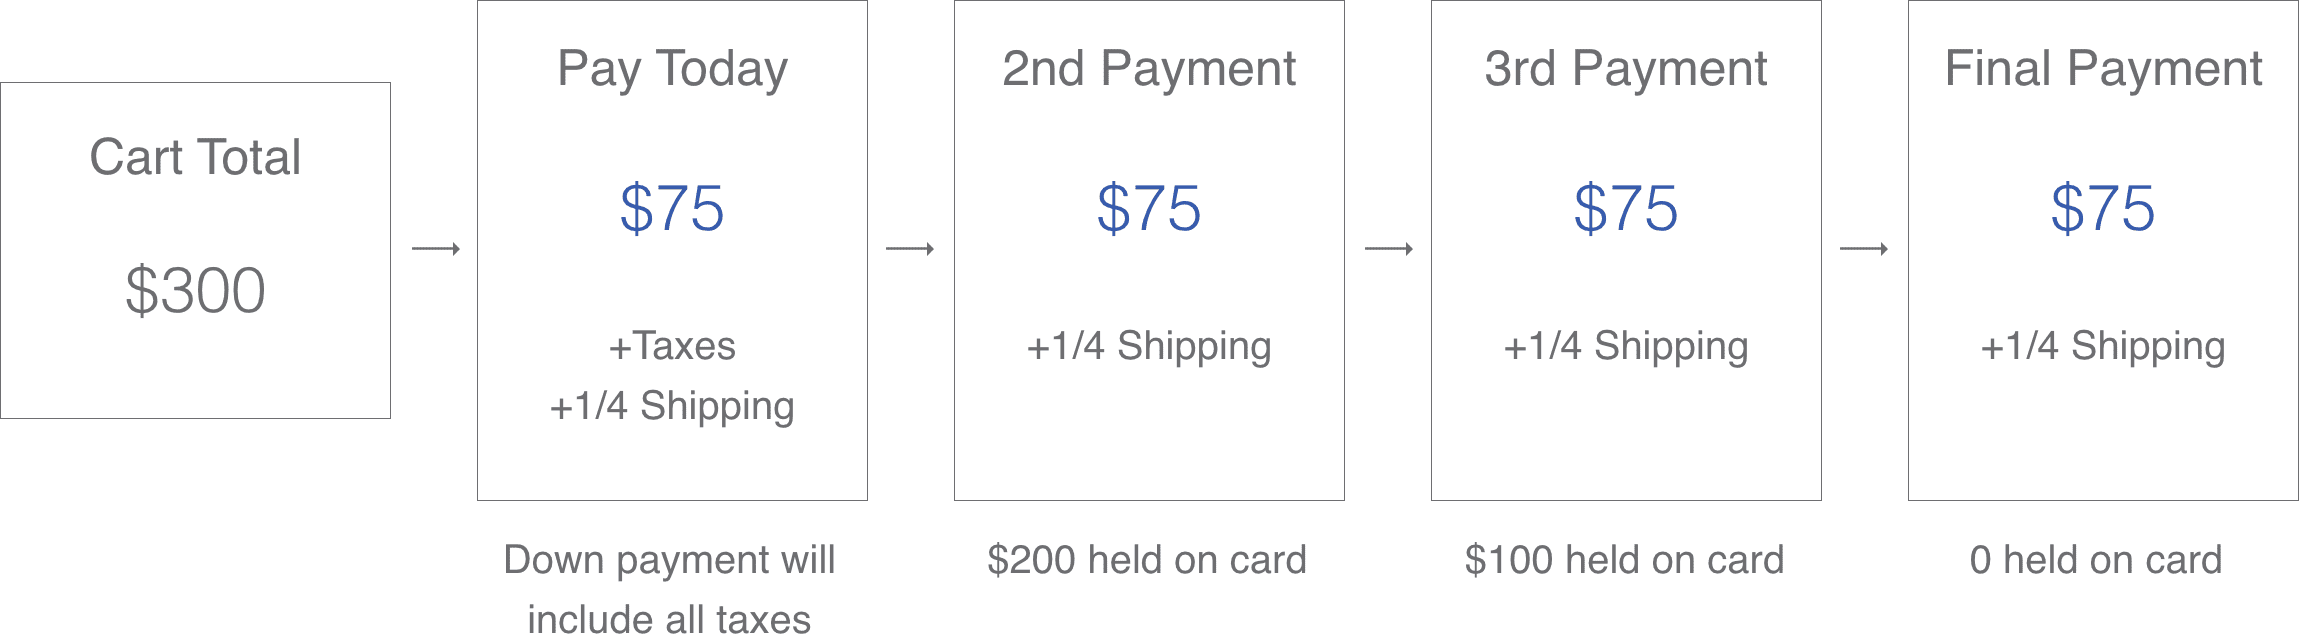 easy pay breakdown: If the cart total is $300, There will be 4 payments of $75+taxes+1/4 of shipping